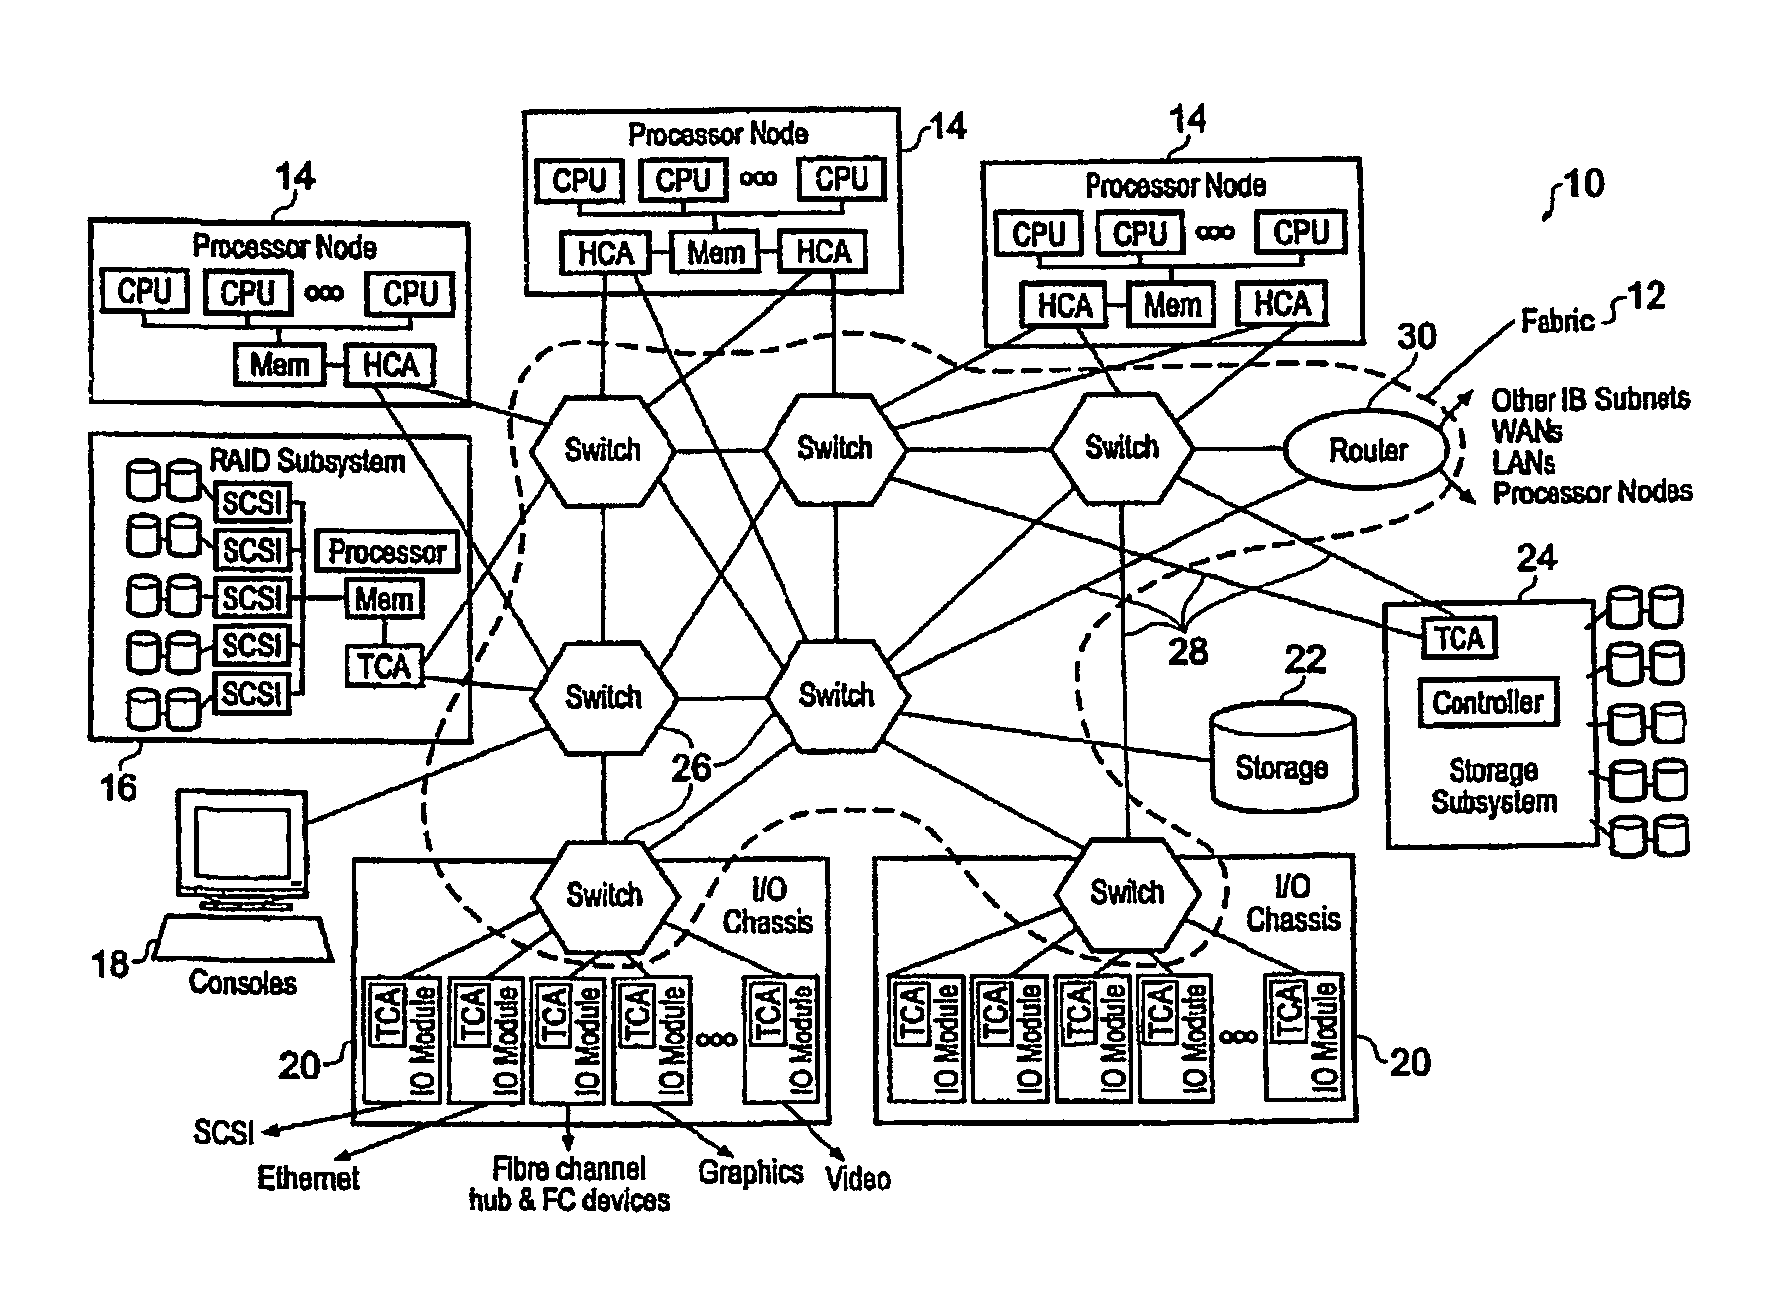 Method and apparatus for testing a network